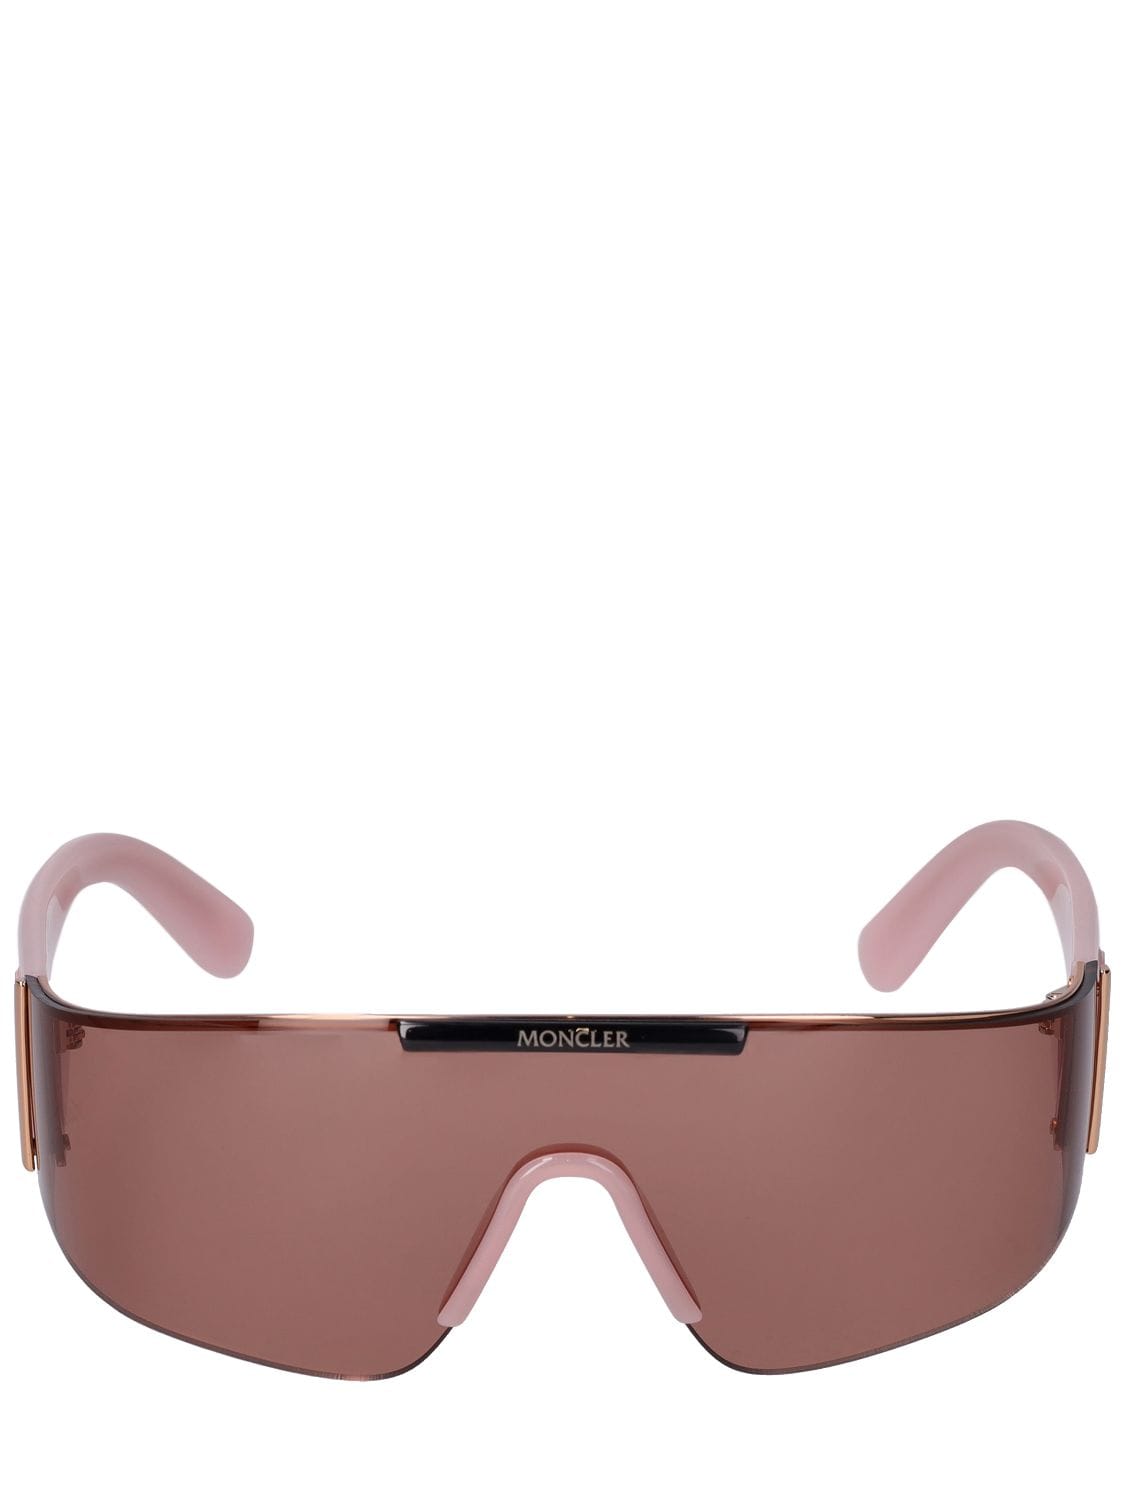 Moncler Ombrate Mask Metal Sunglasses In Pink,brown